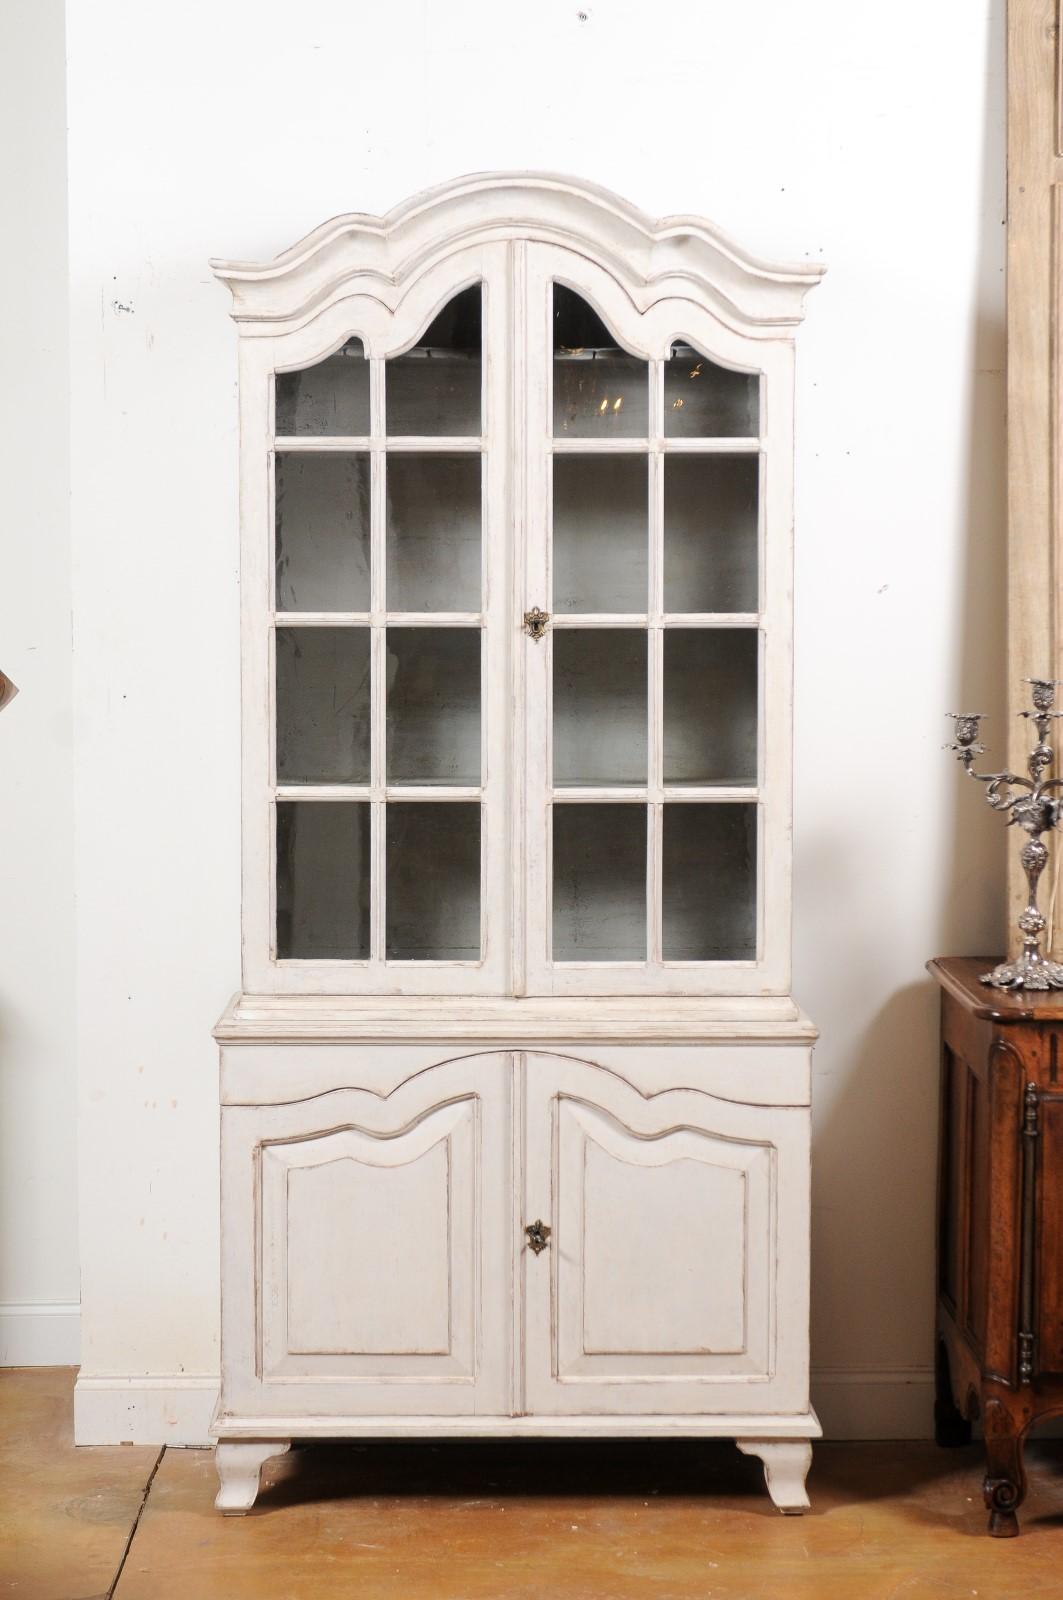 A Swedish Rococo style painted wood vitrine cabinet from the 19th century, with glass doors and arching accents. Created in Sweden during the 19th century, this cabinet features a molded arching cornice sitting above two paneled glass doors opening